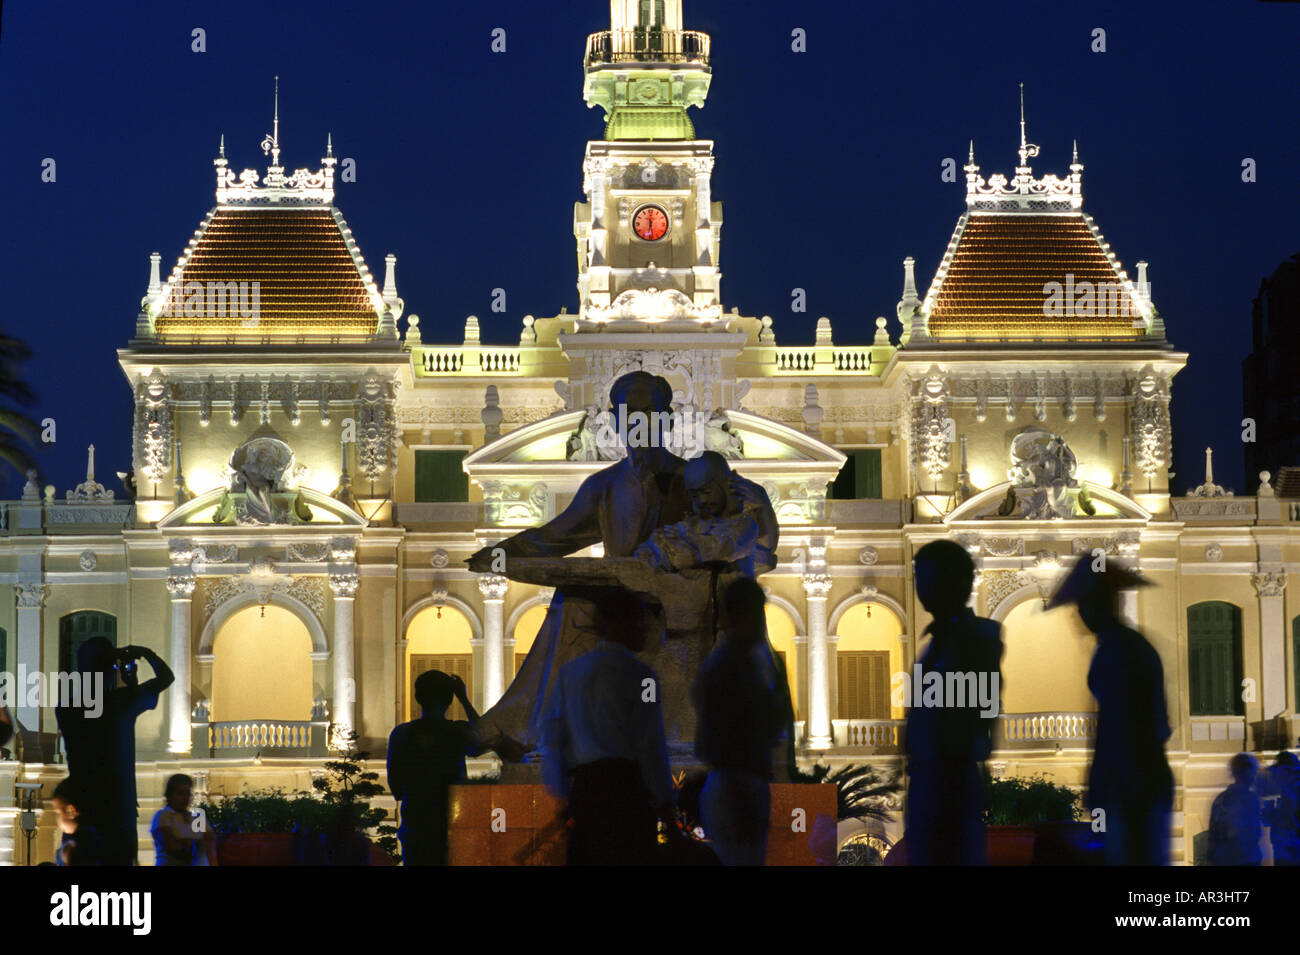 Statue and people in front of the illuminated town hall at night, Ho Chi Minh City, Vietnam, Asia Stock Photo